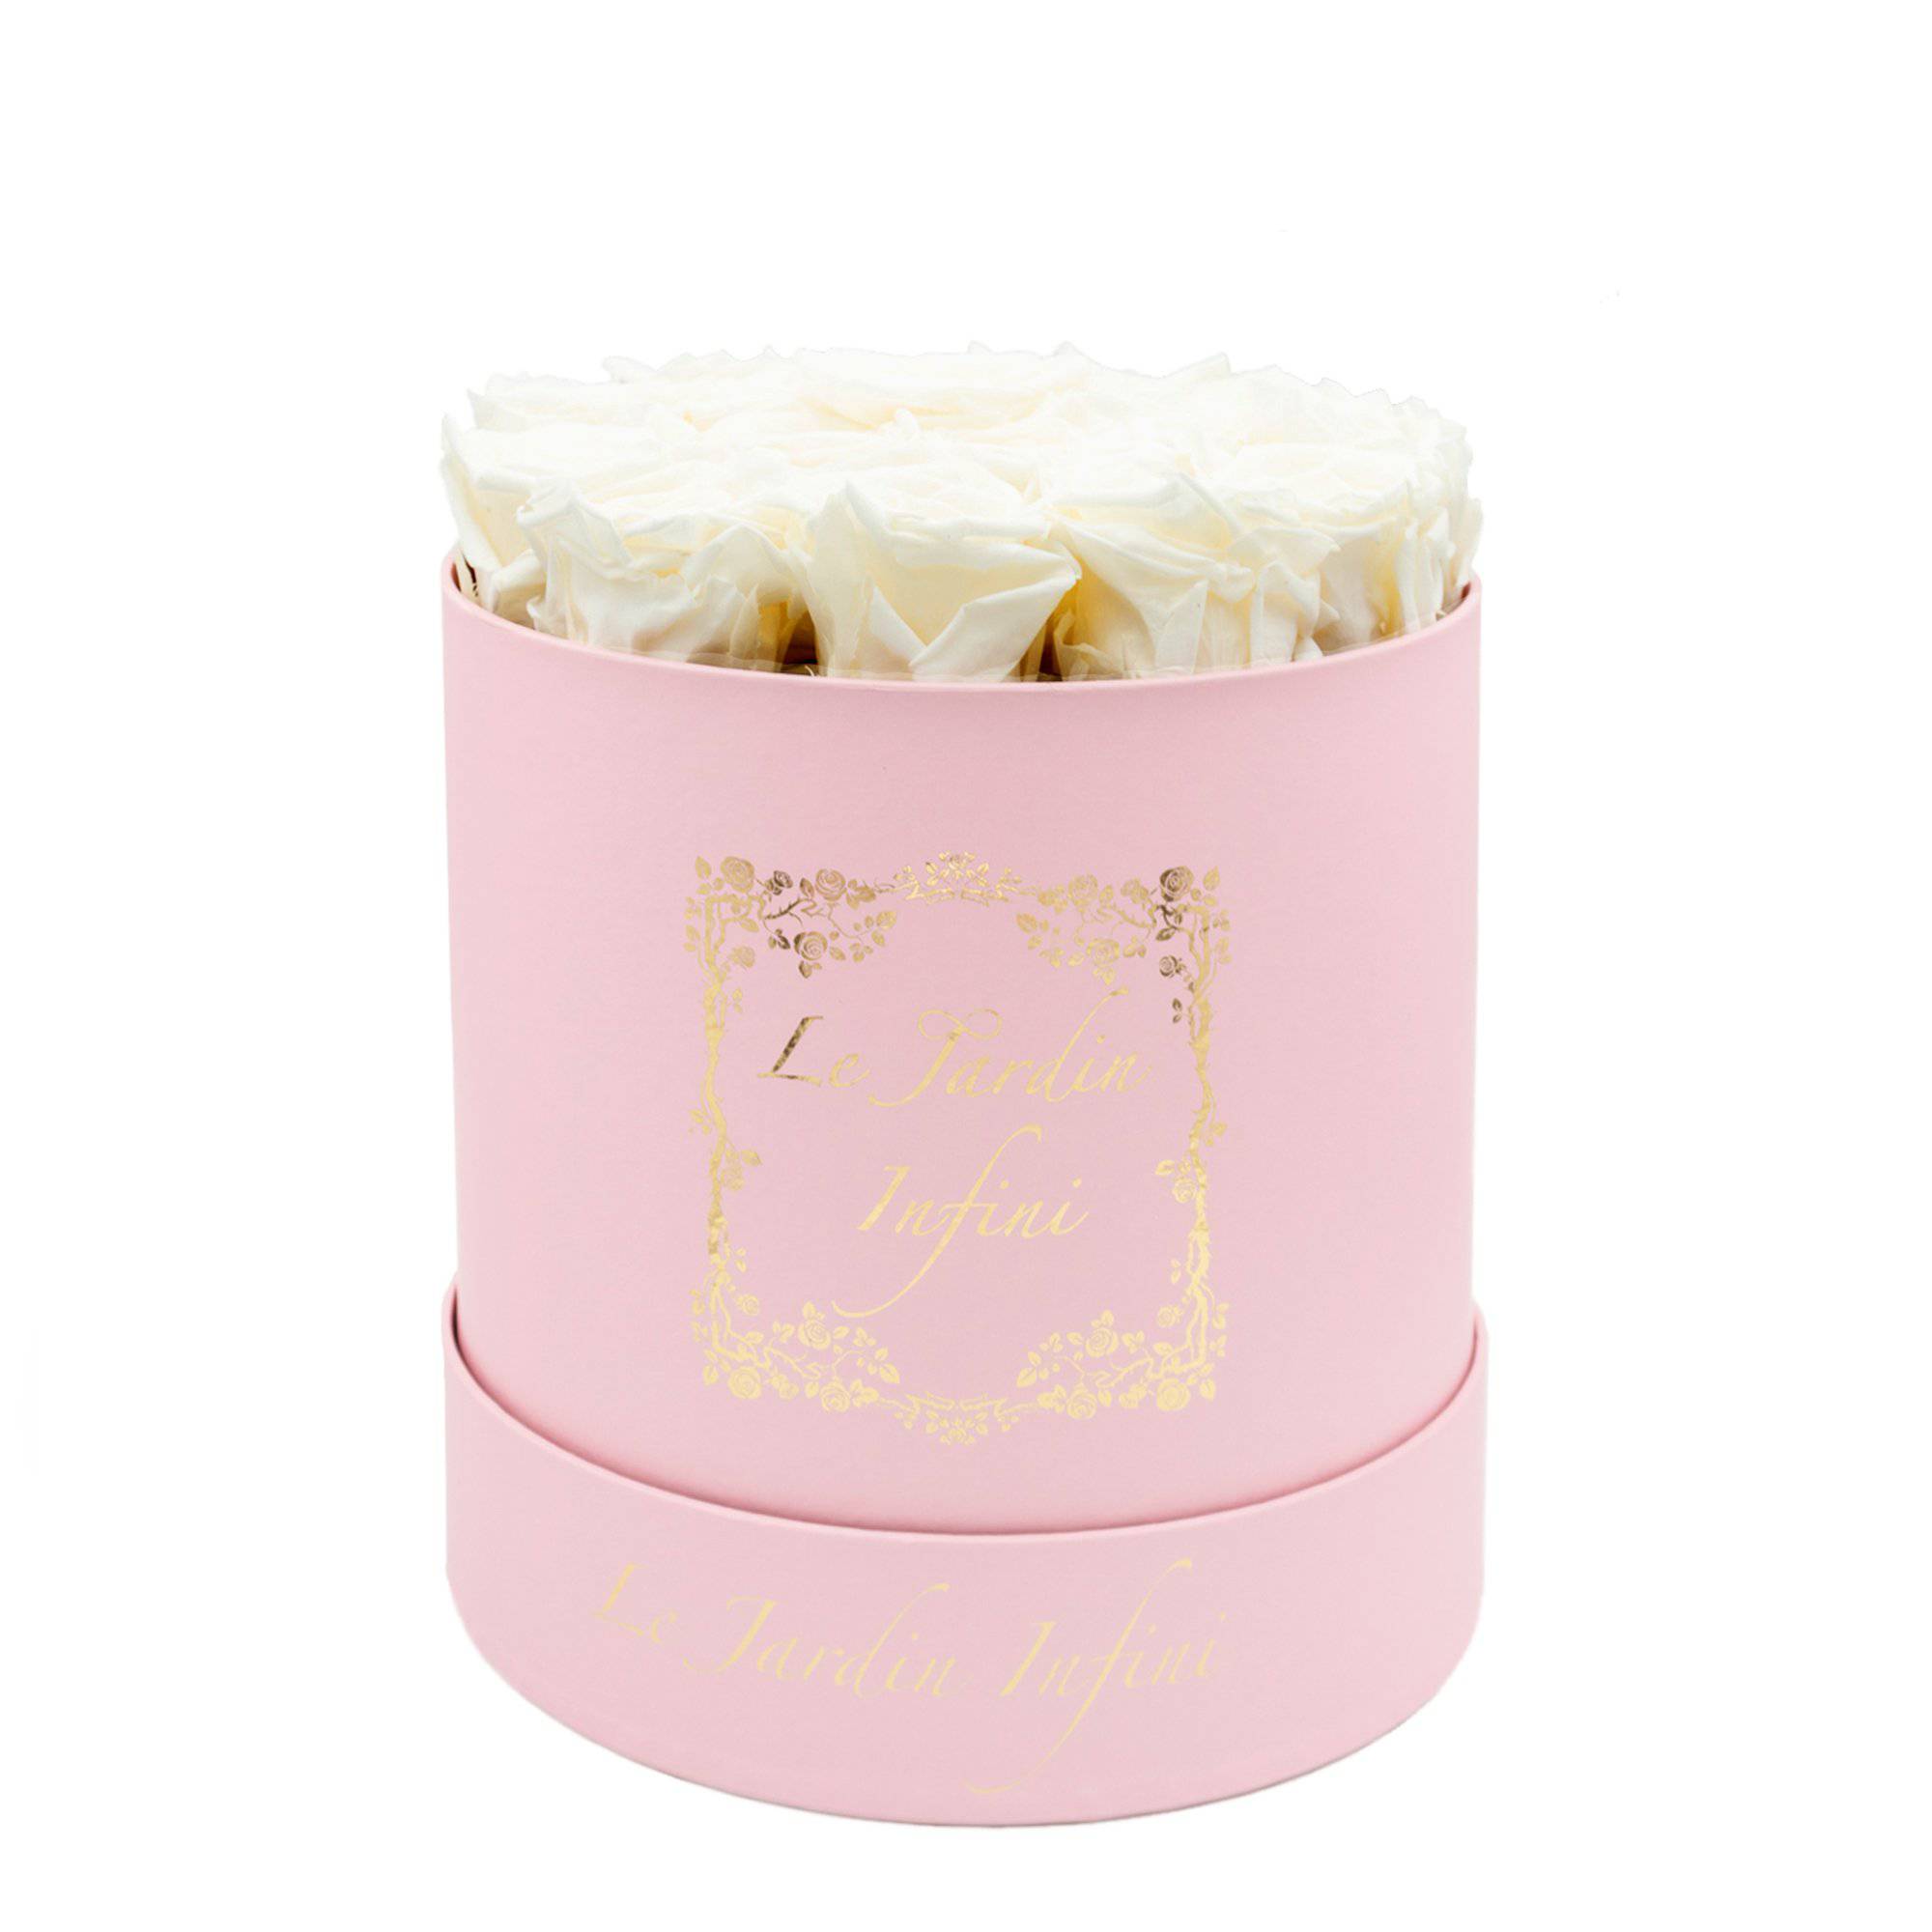 White Preserved Roses - Medium Round Pink Box - Le Jardin Infini Roses in a Box